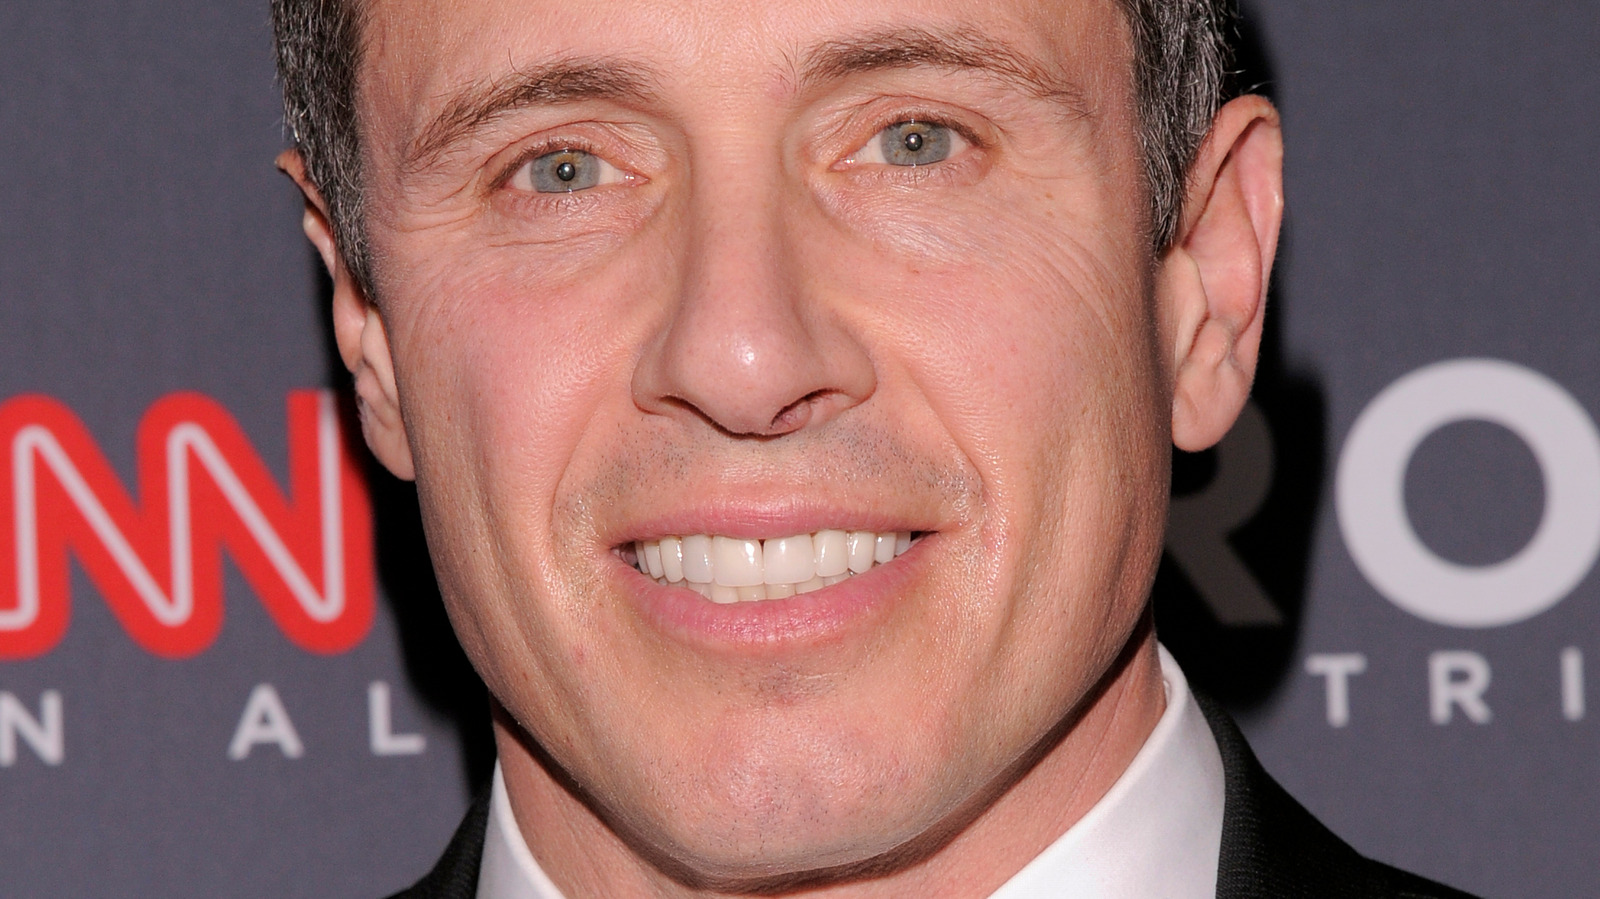 What We Know About The Sexual Harrasment Accusations Against Chris Cuomo